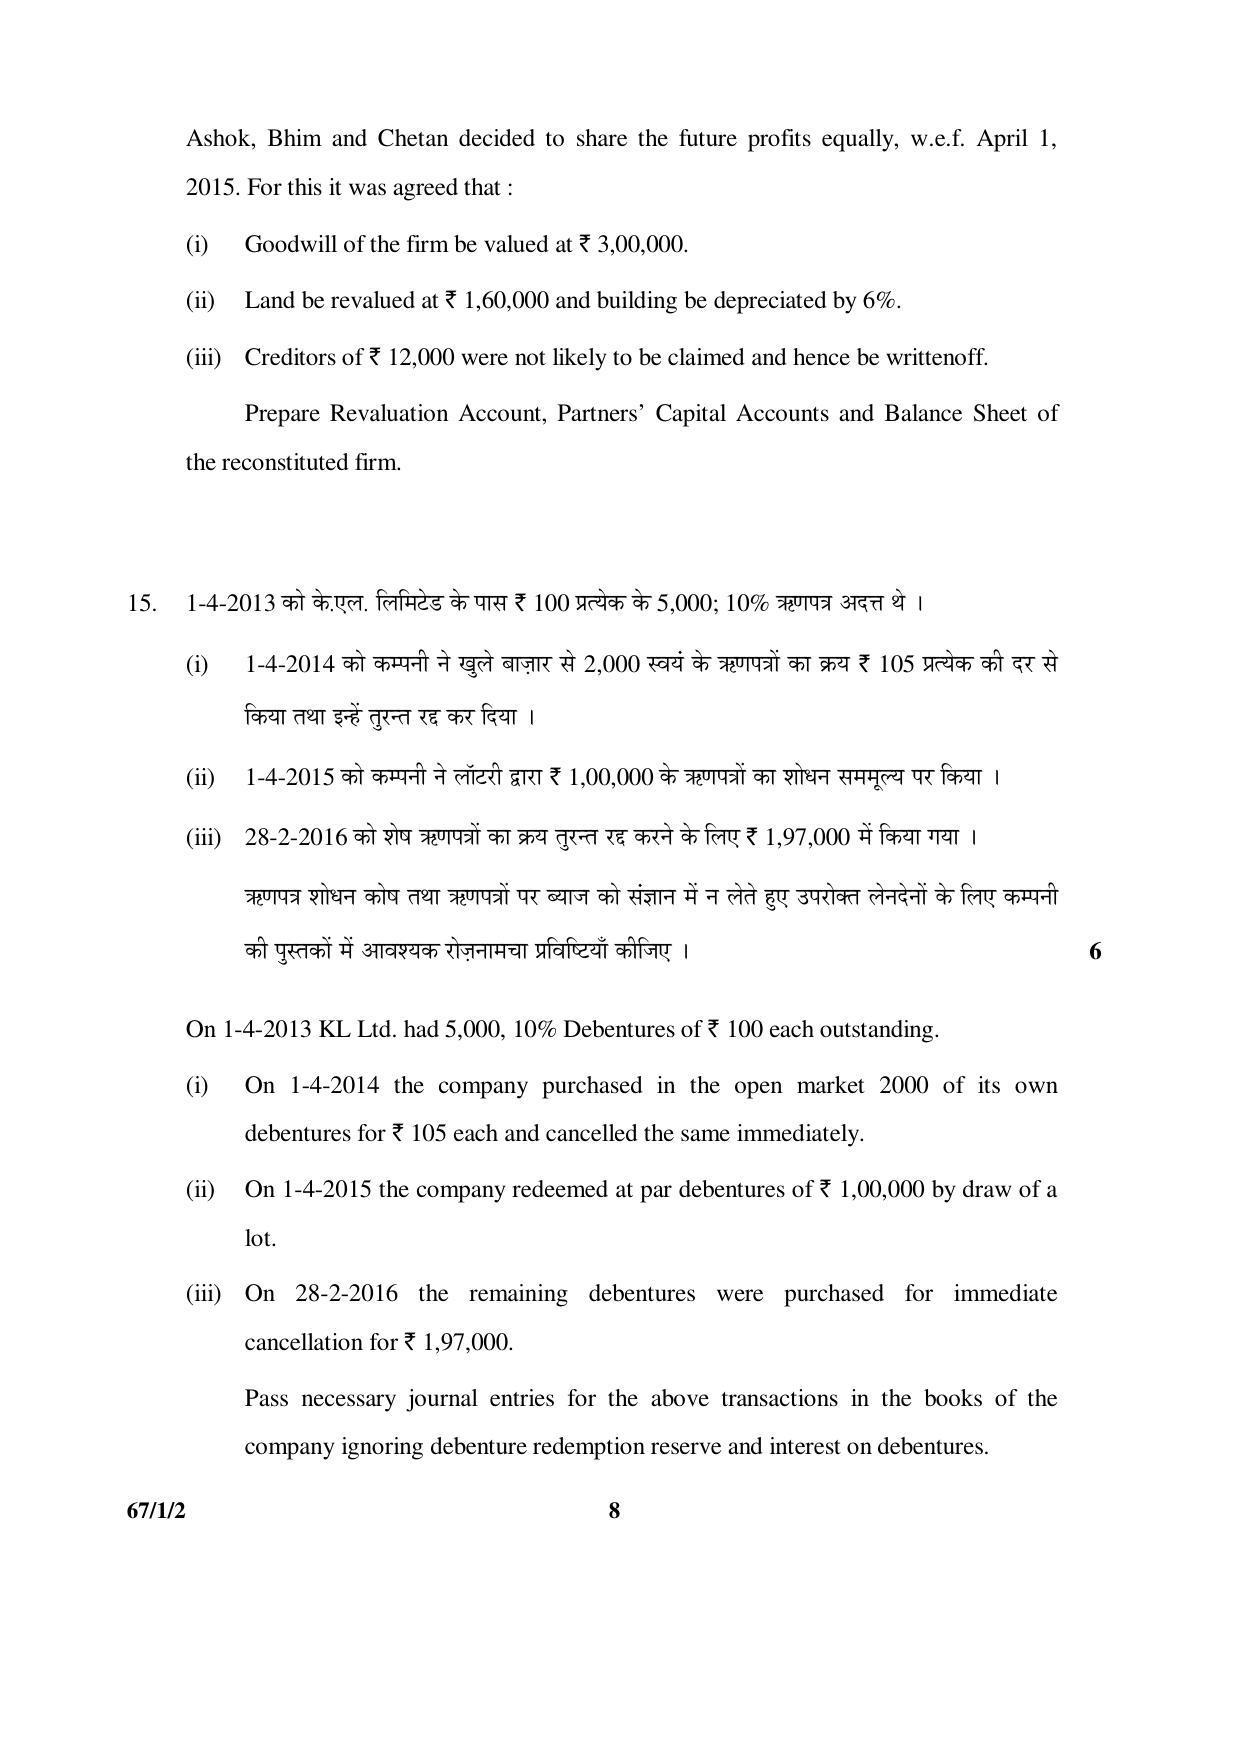 CBSE Class 12 67-1-2 ACCOUNTANCY 2016 Question Paper - Page 8